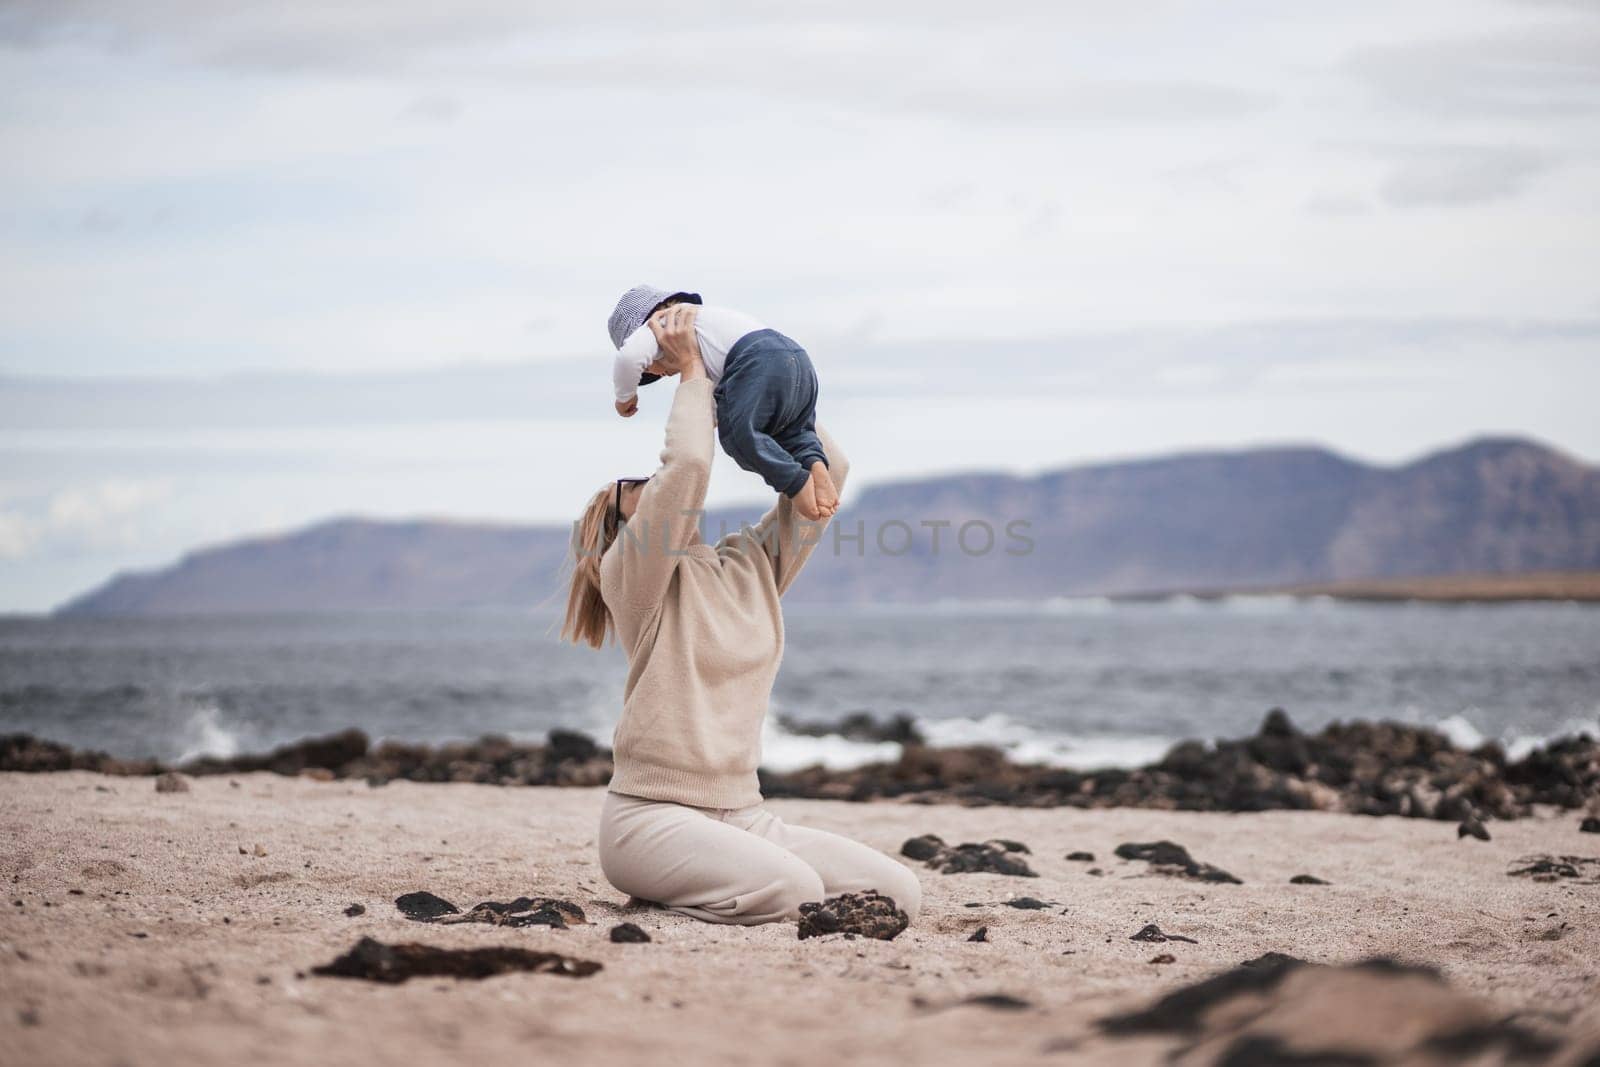 Mother enjoying winter vacations holding, playing and lifting his infant baby boy son high in the air on sandy beach on Lanzarote island, Spain. Family travel and vacations concept.